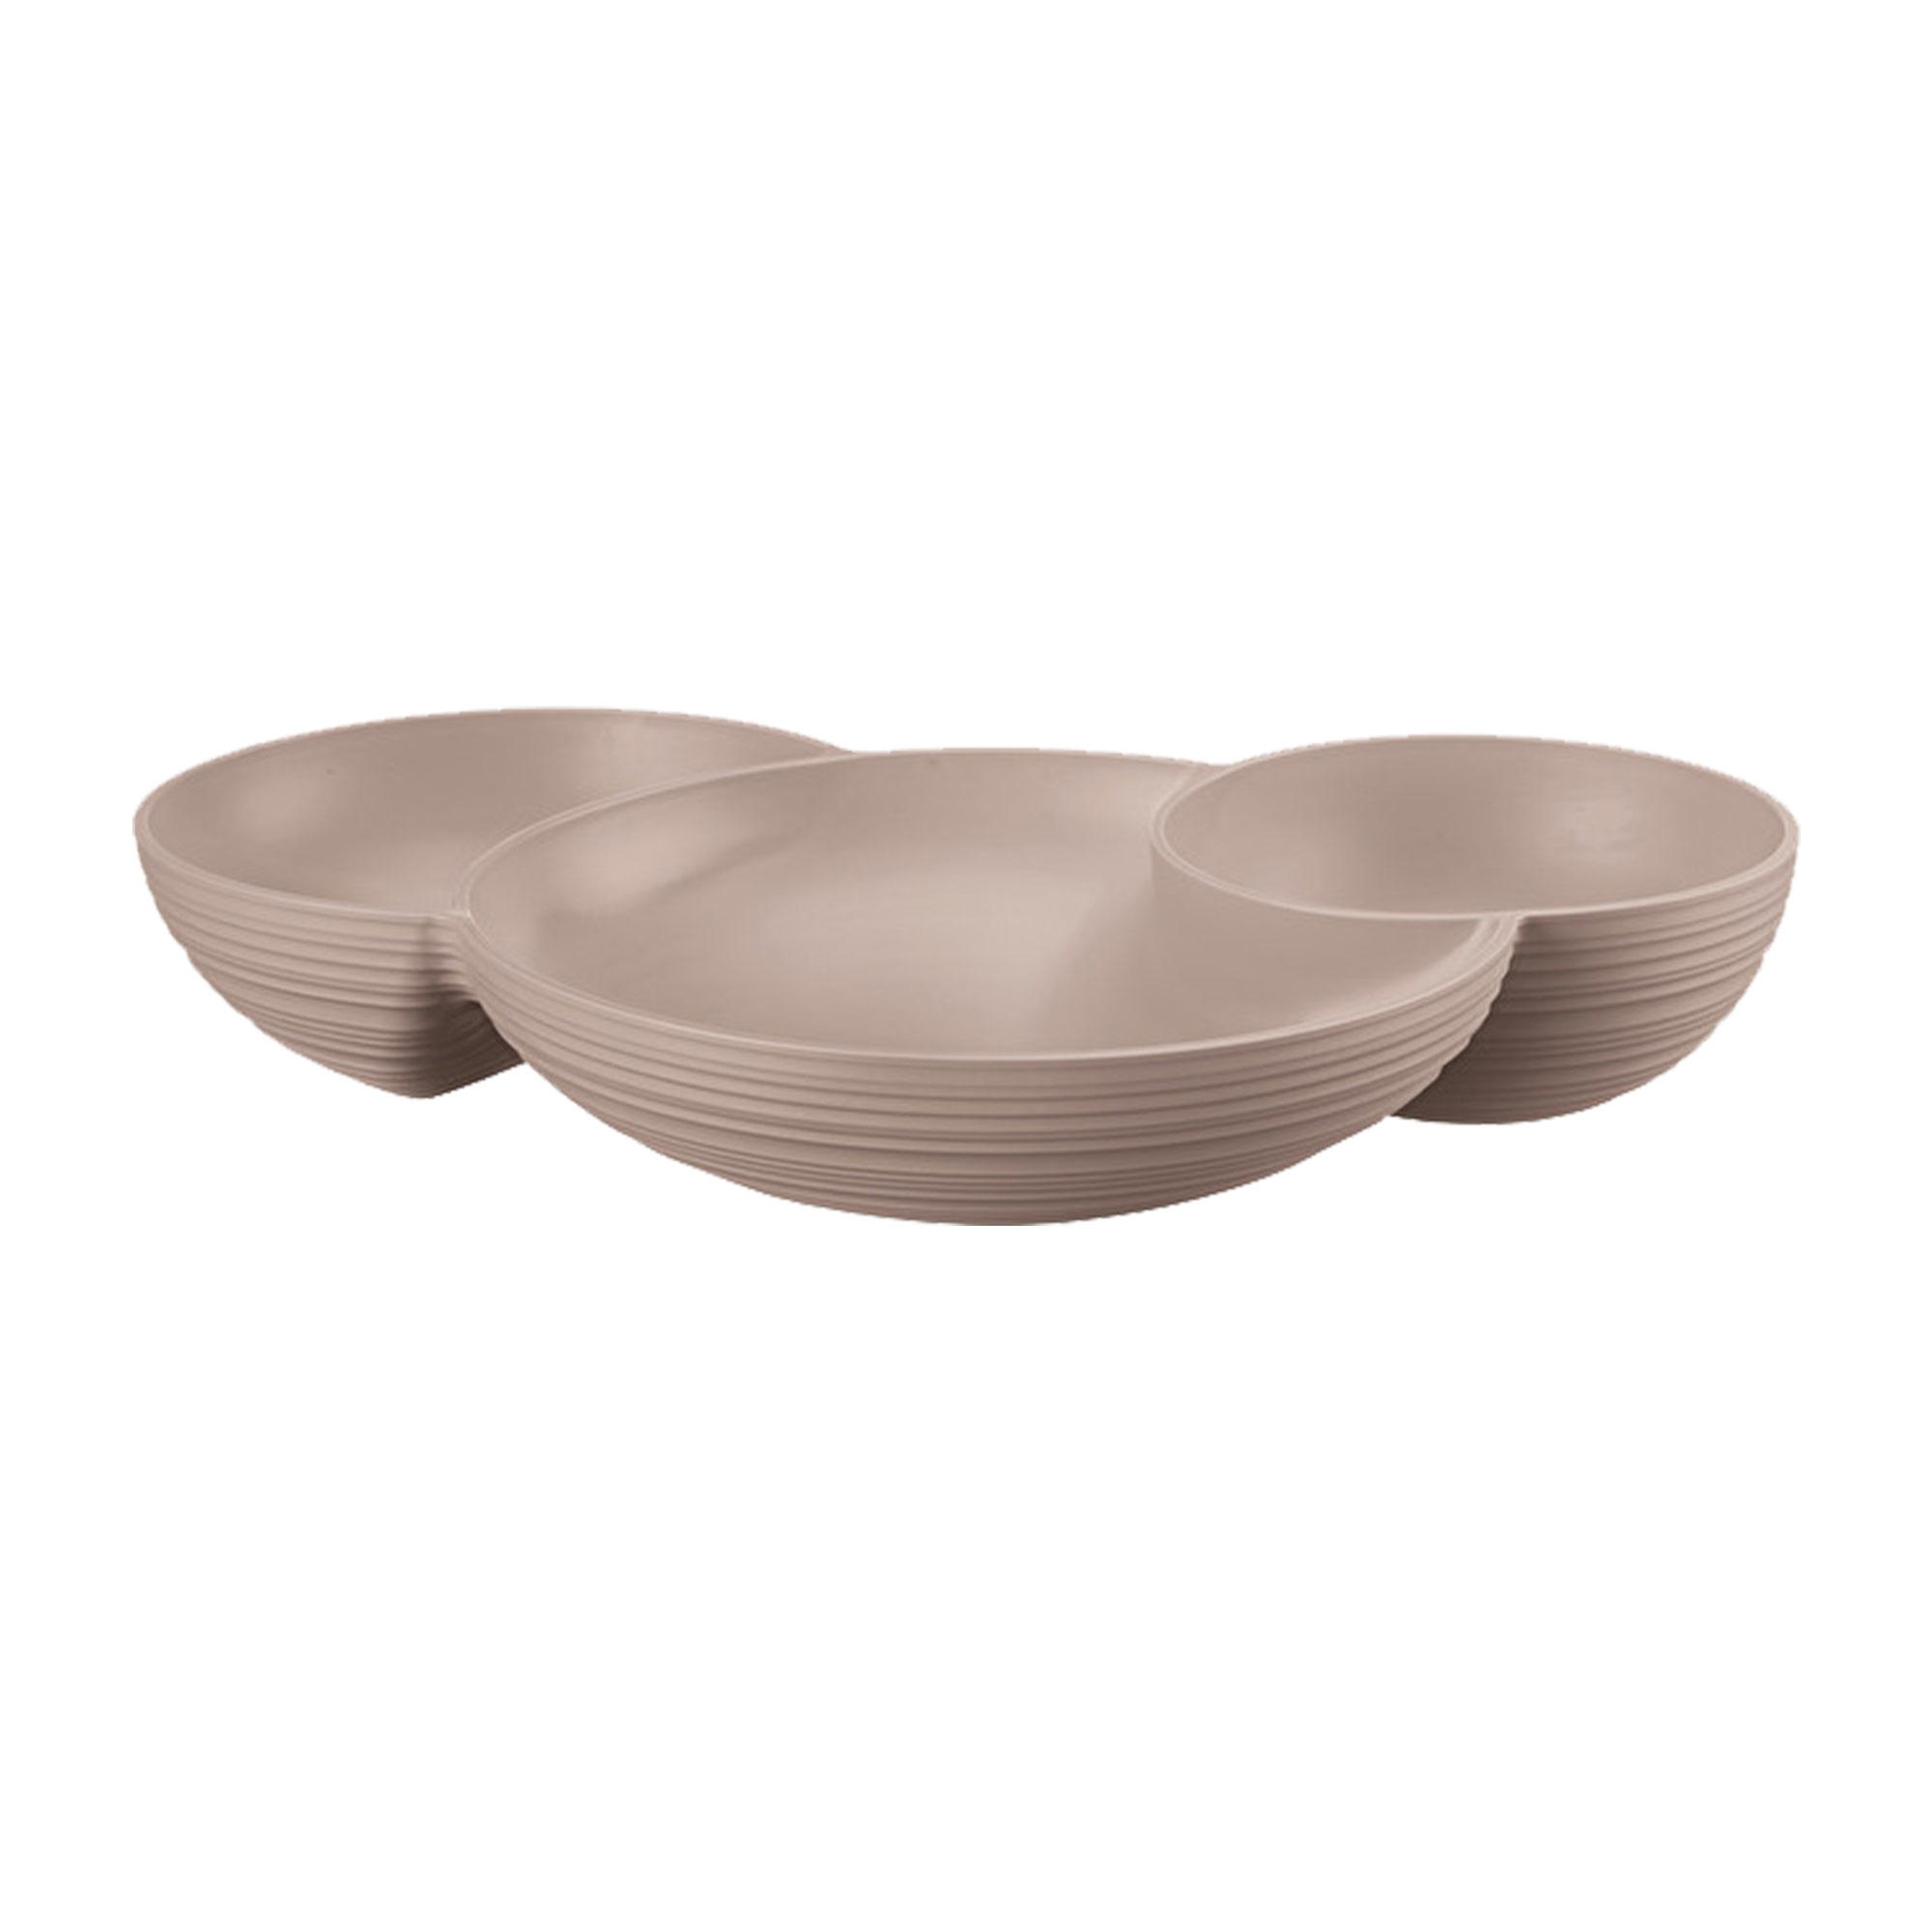 Guzzini Earth Tierra Hors D'oeuvres Serving Dish Taupe Image 1